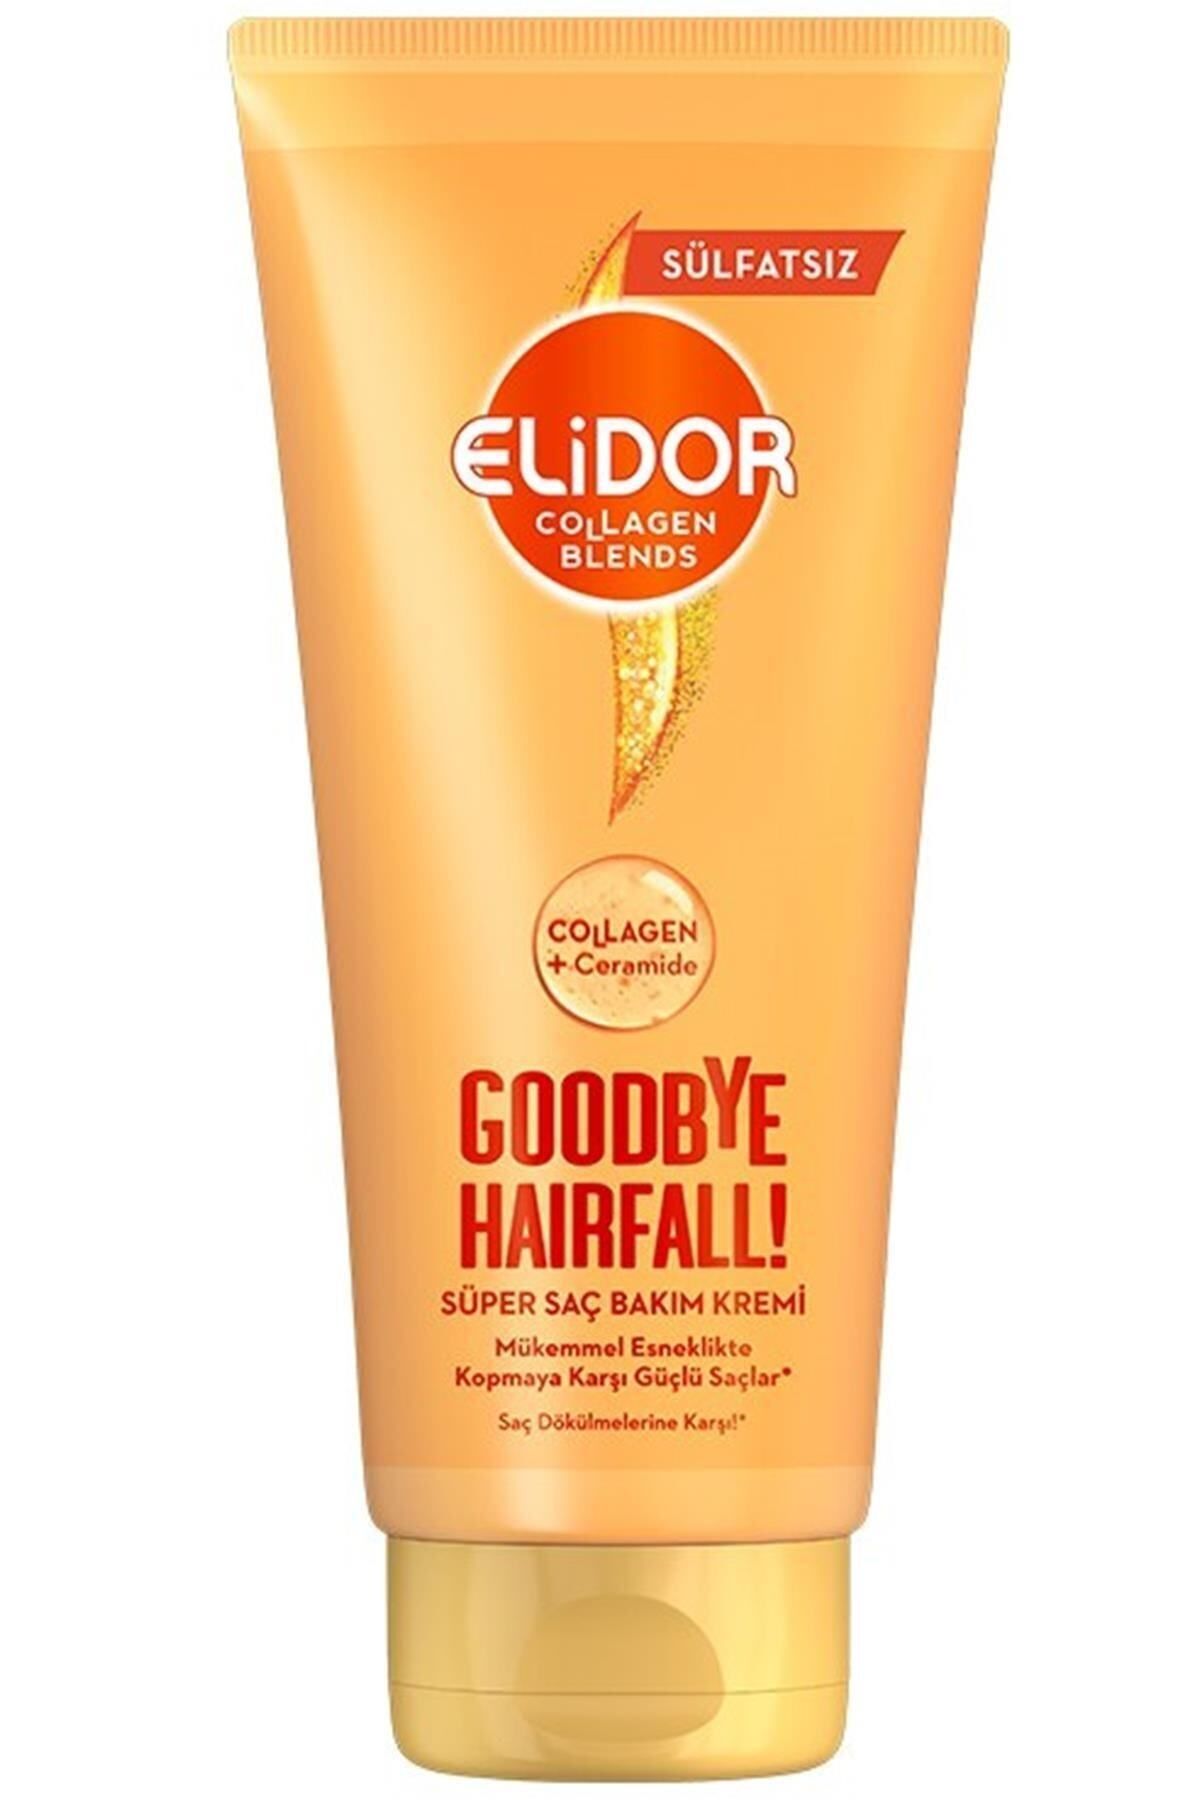 Elidor Collagen Blends Sulfate-Free Super Hair Care Cream Goodbye Hairfall Against Hair Loss 170